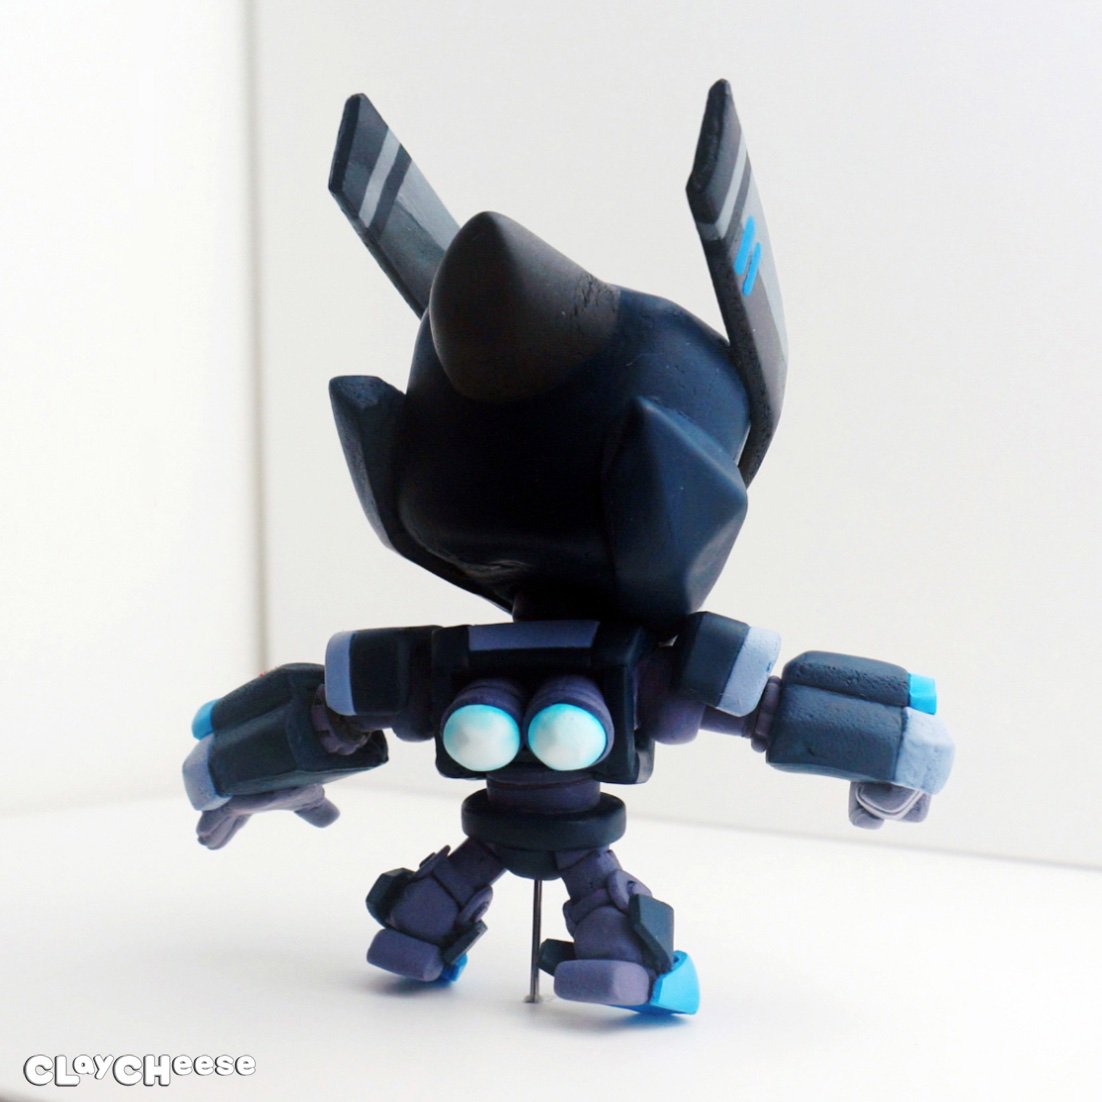 Claycheese 클치 On Twitter Hello It S Claycheese I Made Brawl Stars Night Mecha Crow With Air Dry Clay If You Want You Can See The Making Video Https T Co W3z3nyh5pz Thank You Brawlstarsbibi Brawlstars - crow brawl stars mecha night mecha crow